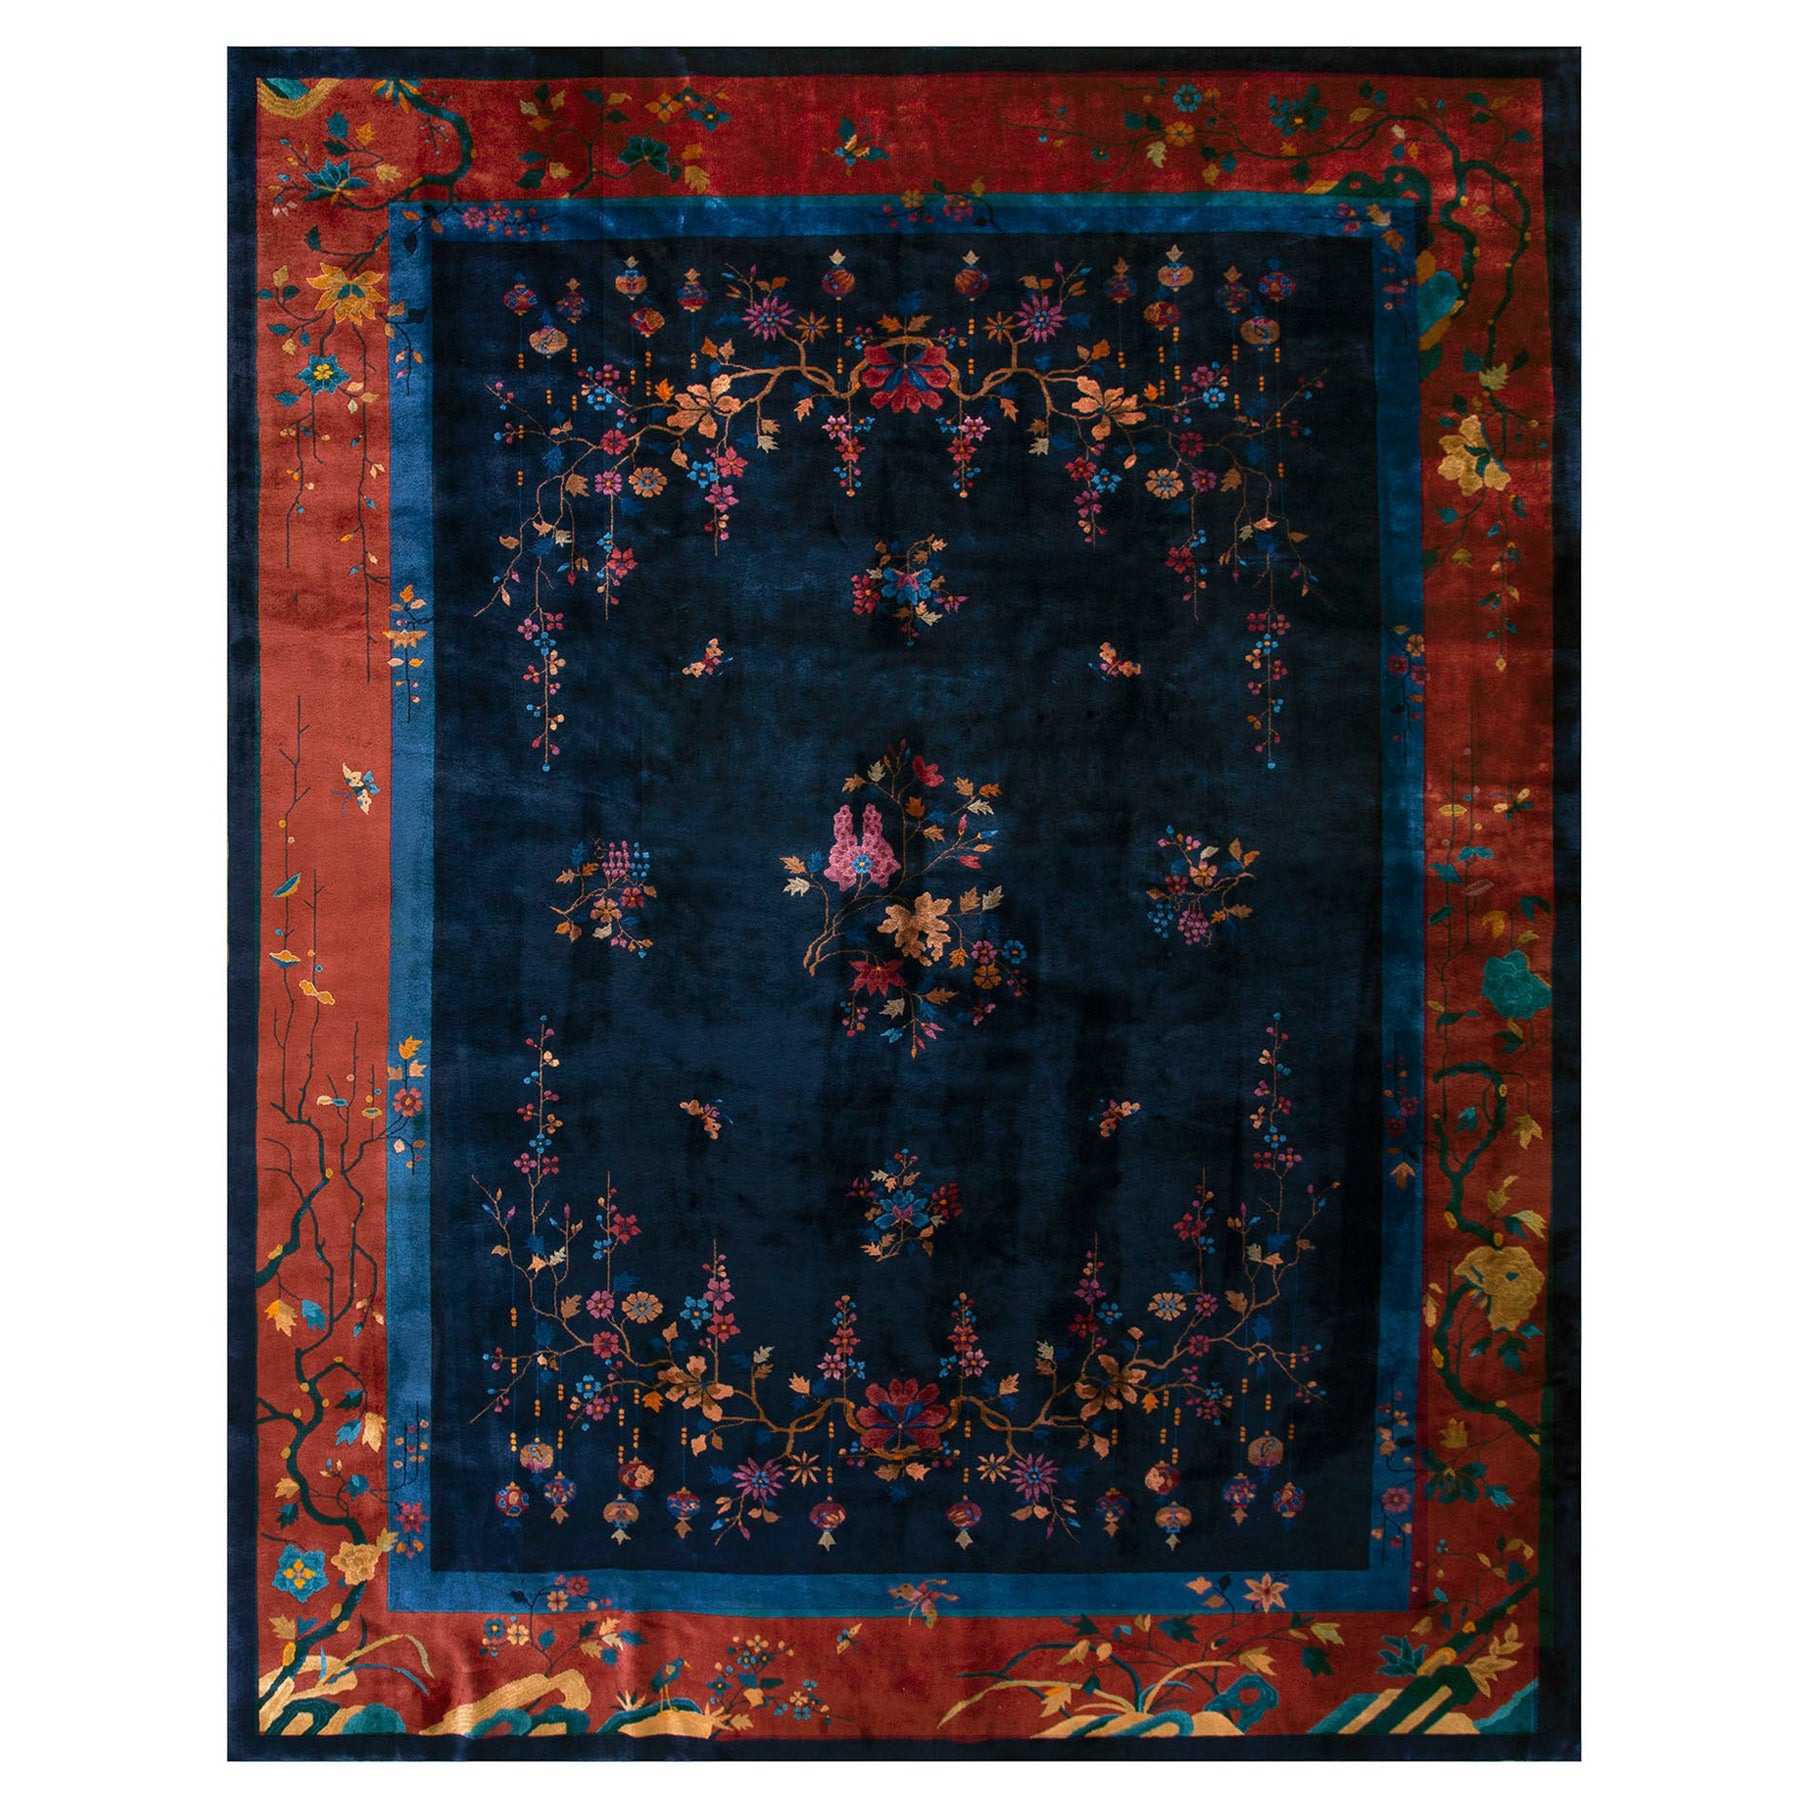 1920s Chinese Art Deco Carpet ( 11'2" x14'6" - 340 x 442 ) For Sale